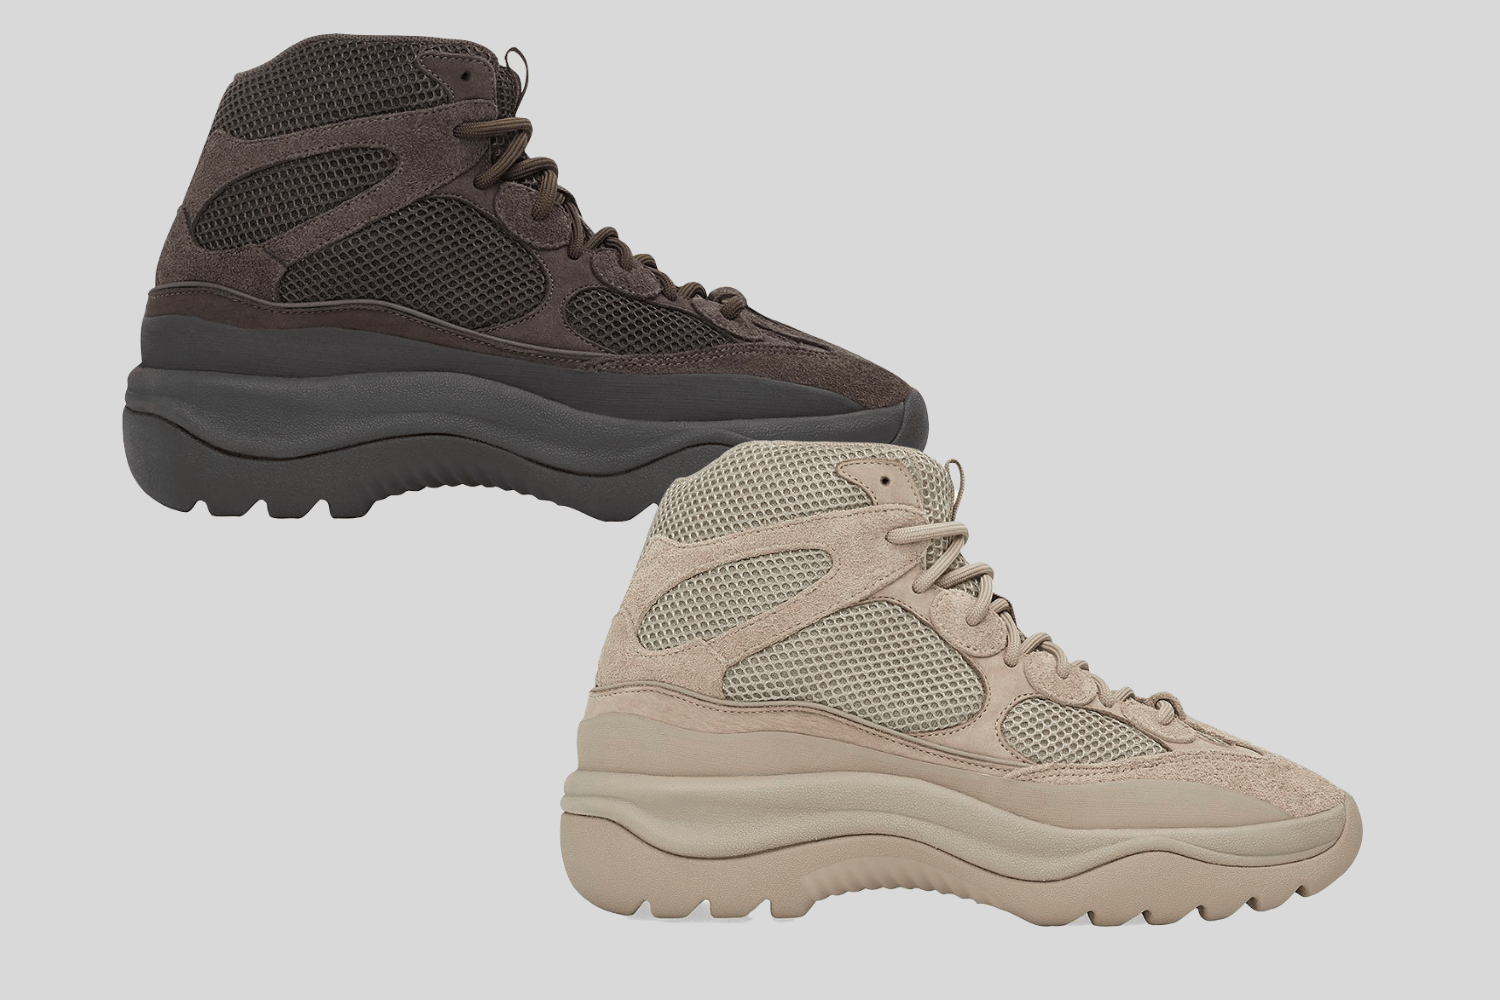 The Yeezy Desert Boot 'Rock' and 'Oil' will get a restock